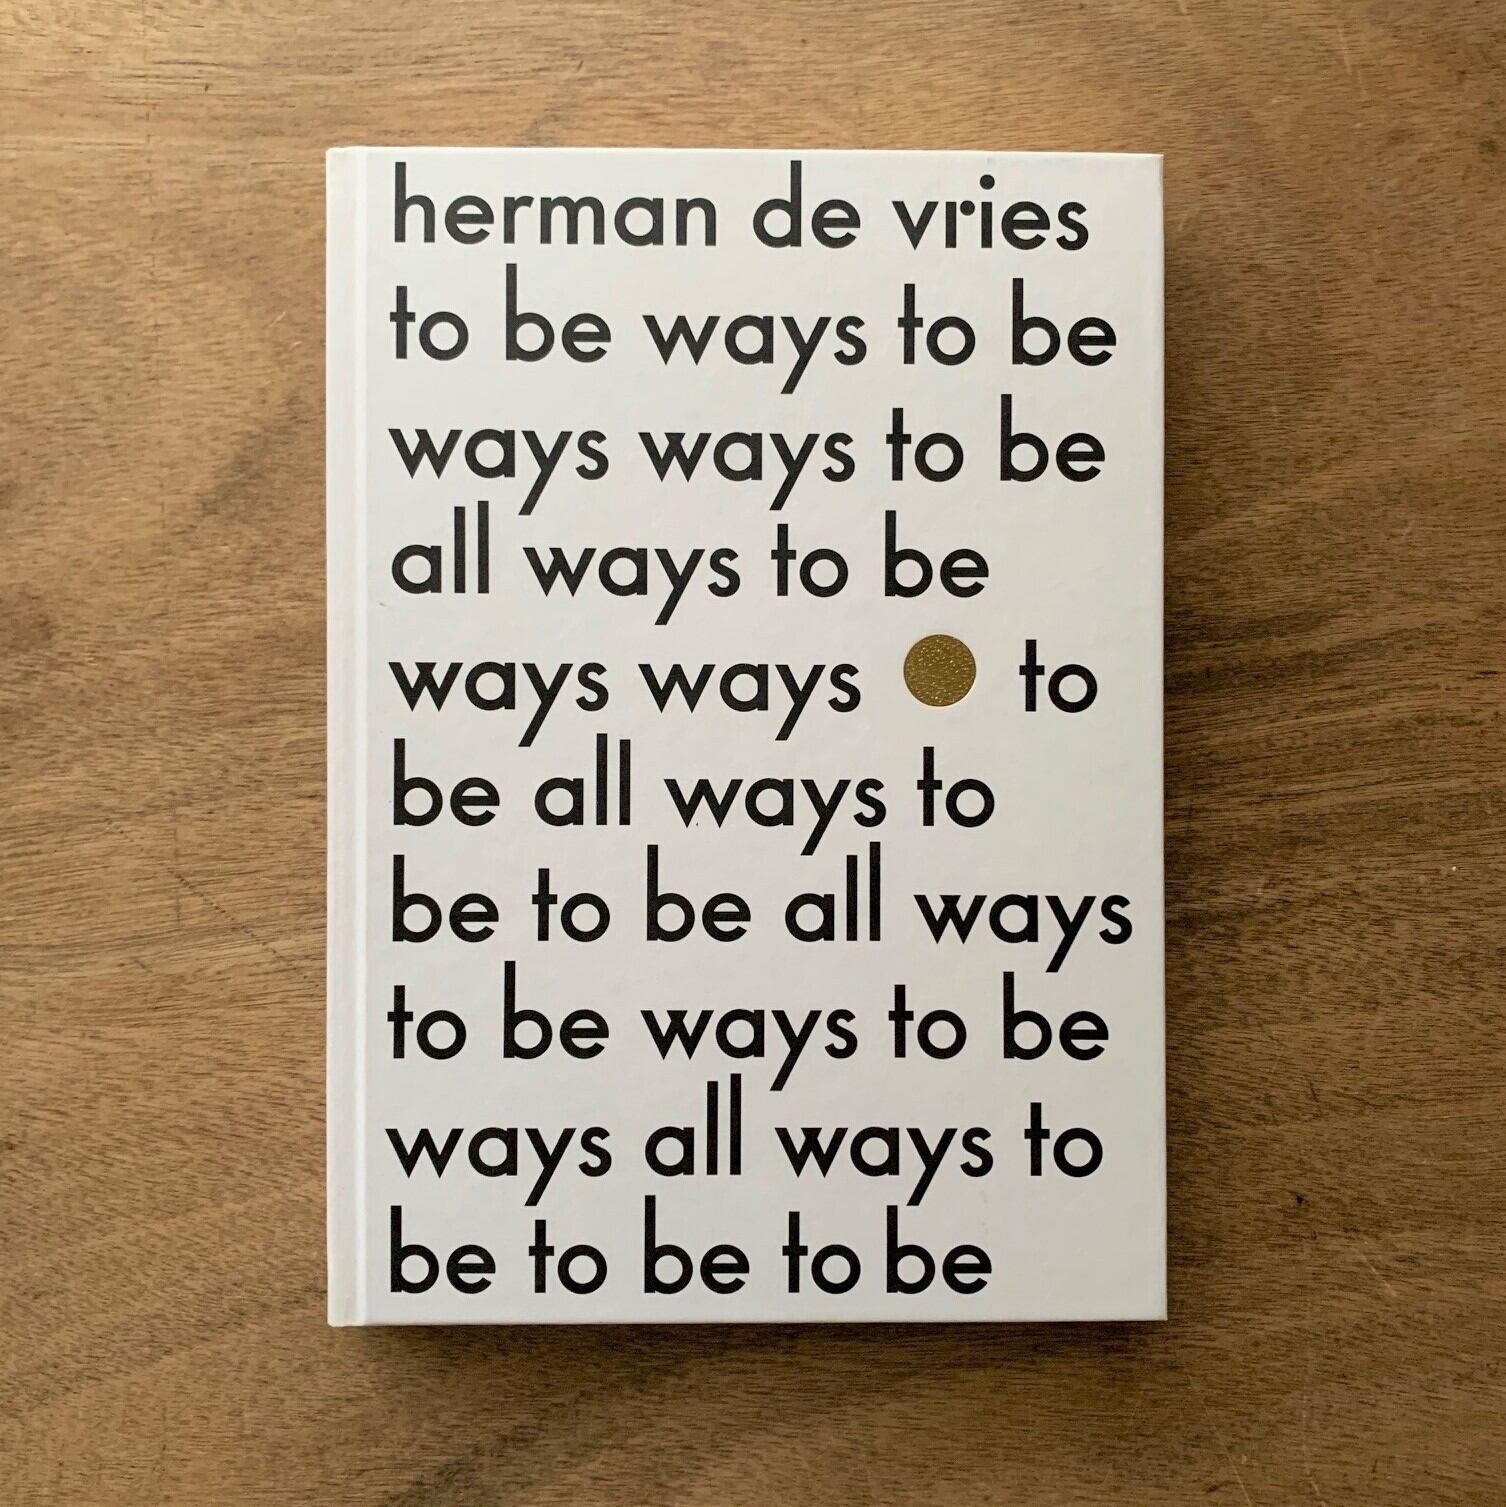 to be all ways to be  /  ヘルマン・デ・フリース  herman de vries